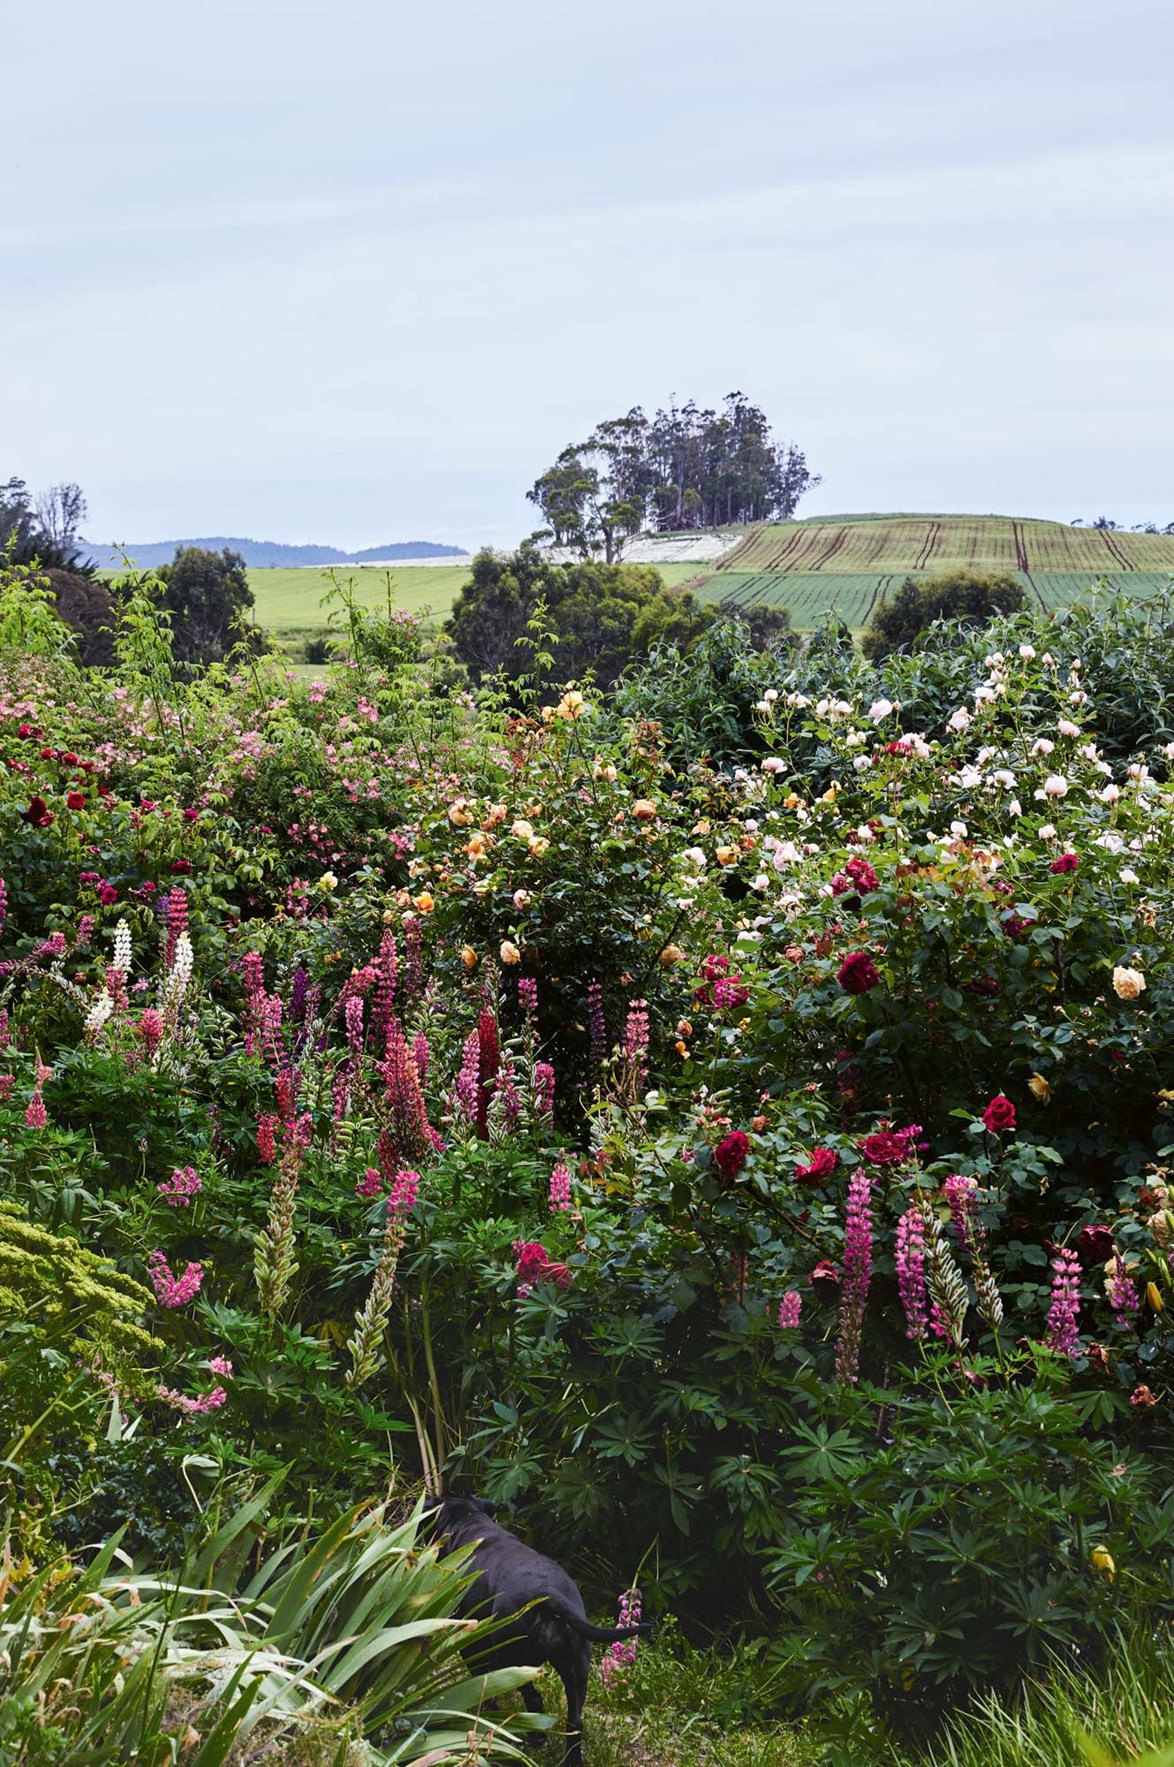 Sable the dog disappears into bushes of roses and other tall perennials. This sprawling garden is the brainchild of Tom Lyons and Fraser Young, who were inspired to create a [garden in Northern Tasmania](https://www.homestolove.com.au/rose-haven-a-lush-garden-in-northern-tasmania-14015|target="_blank") after attending a seminar by gardening author Susan Irvine. *Photo: Mark Roper*